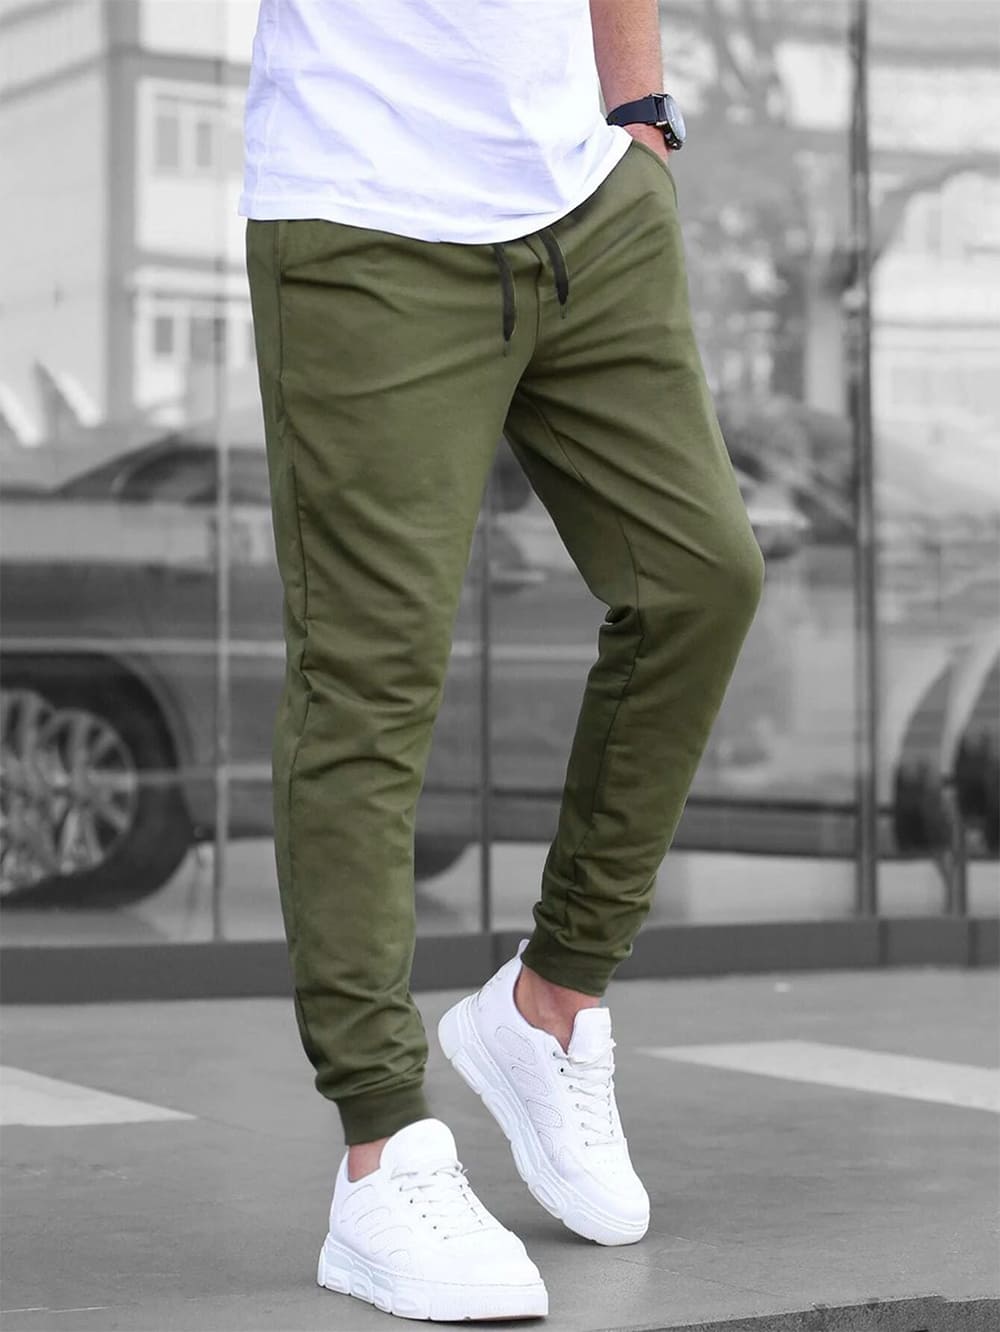 How to Wear Green Pants - Next Level Gents | Green pants outfit, Green  pants men, Olive pants men